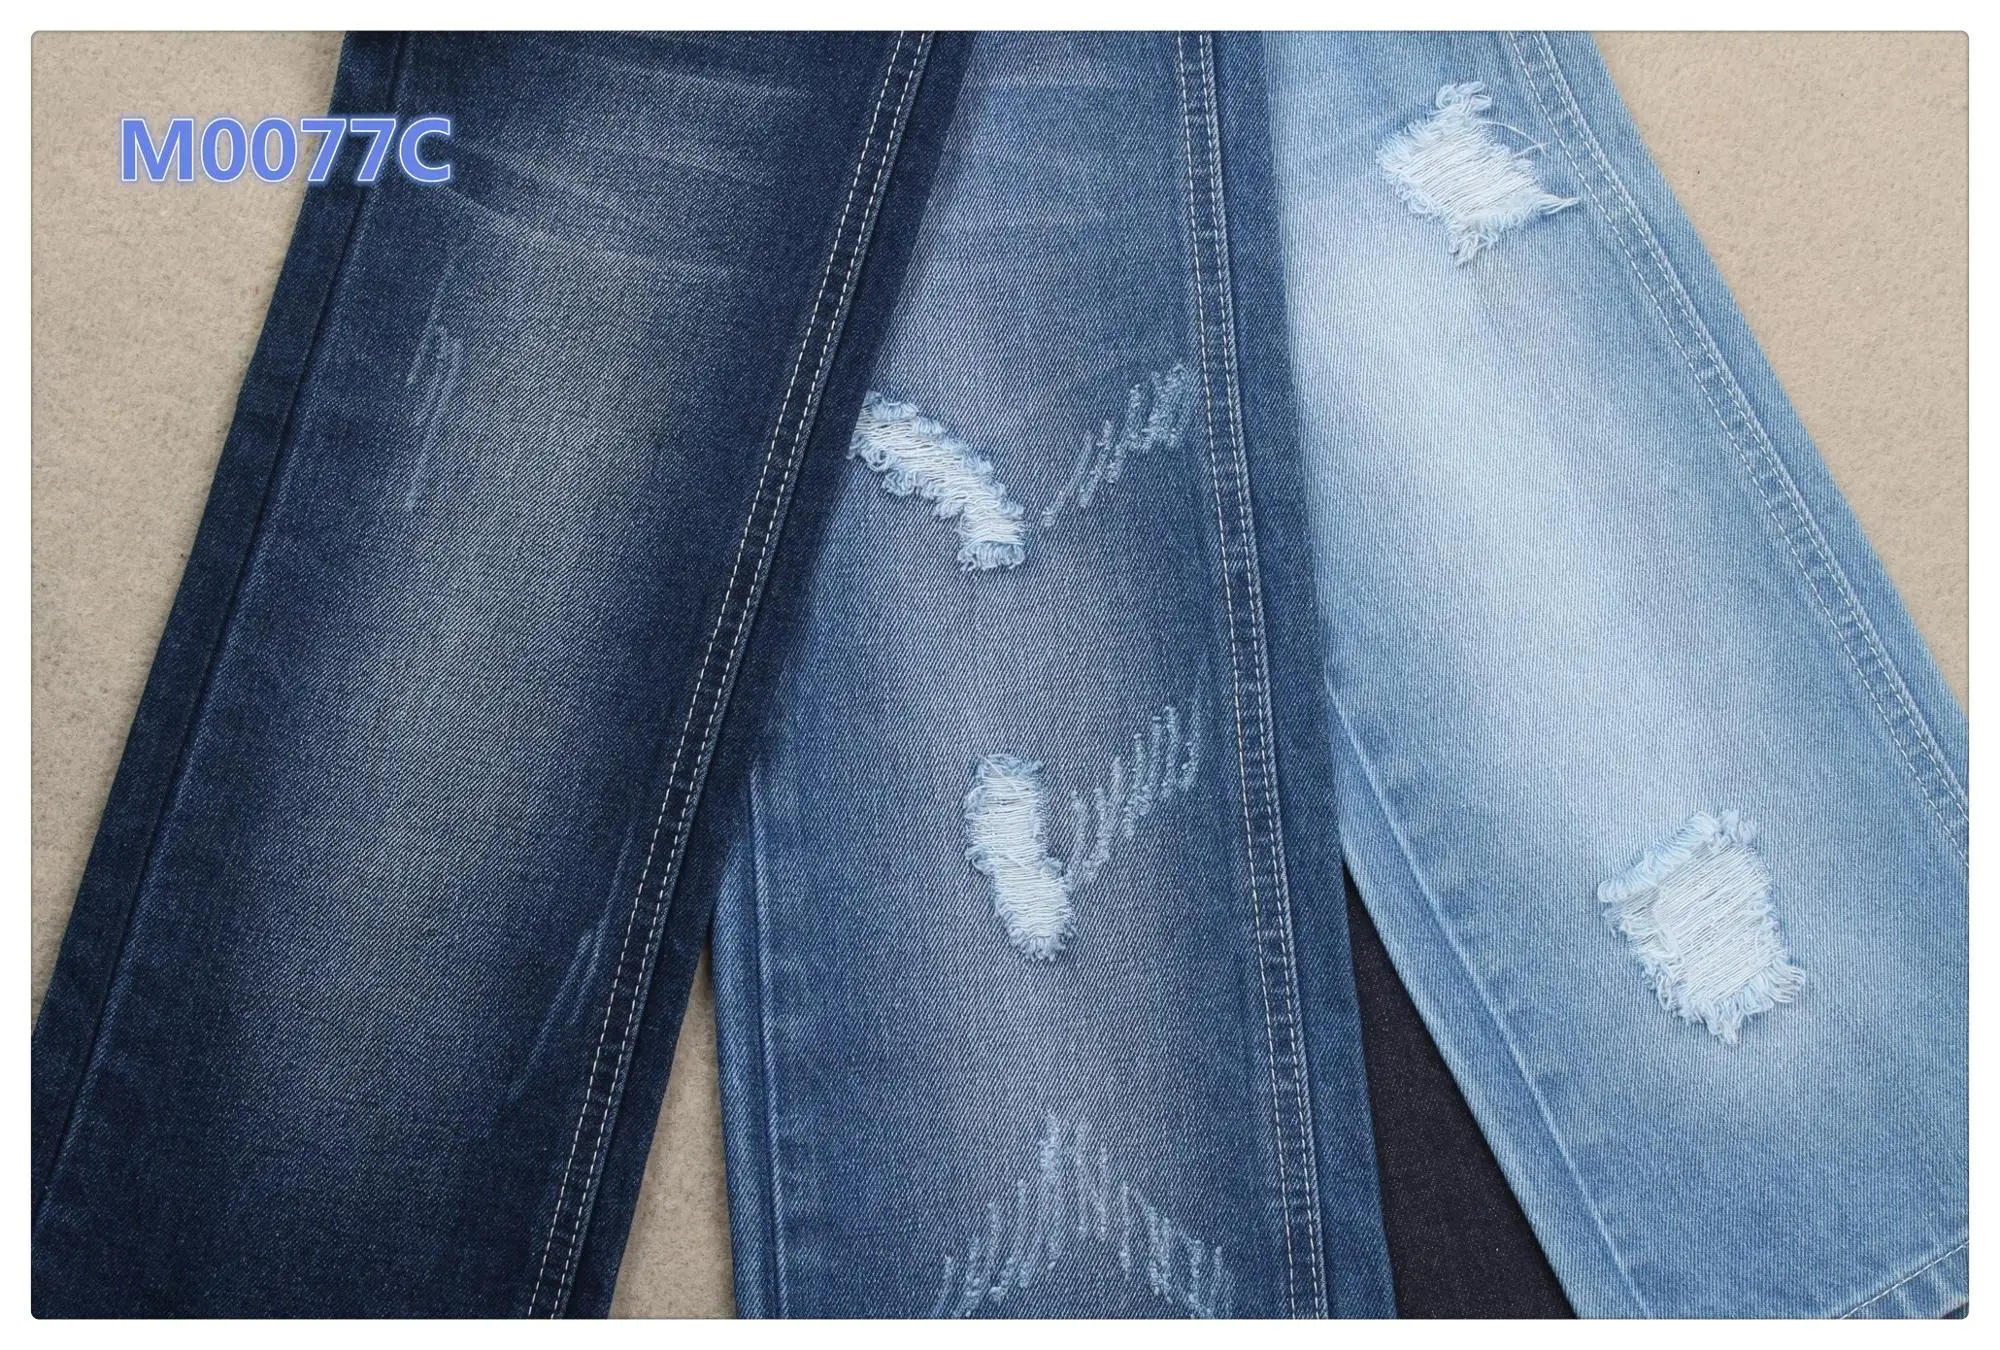 M0077c 100% Cotton Hot Sale Cheap Price Denim Fabric For Jeans - Buy ...